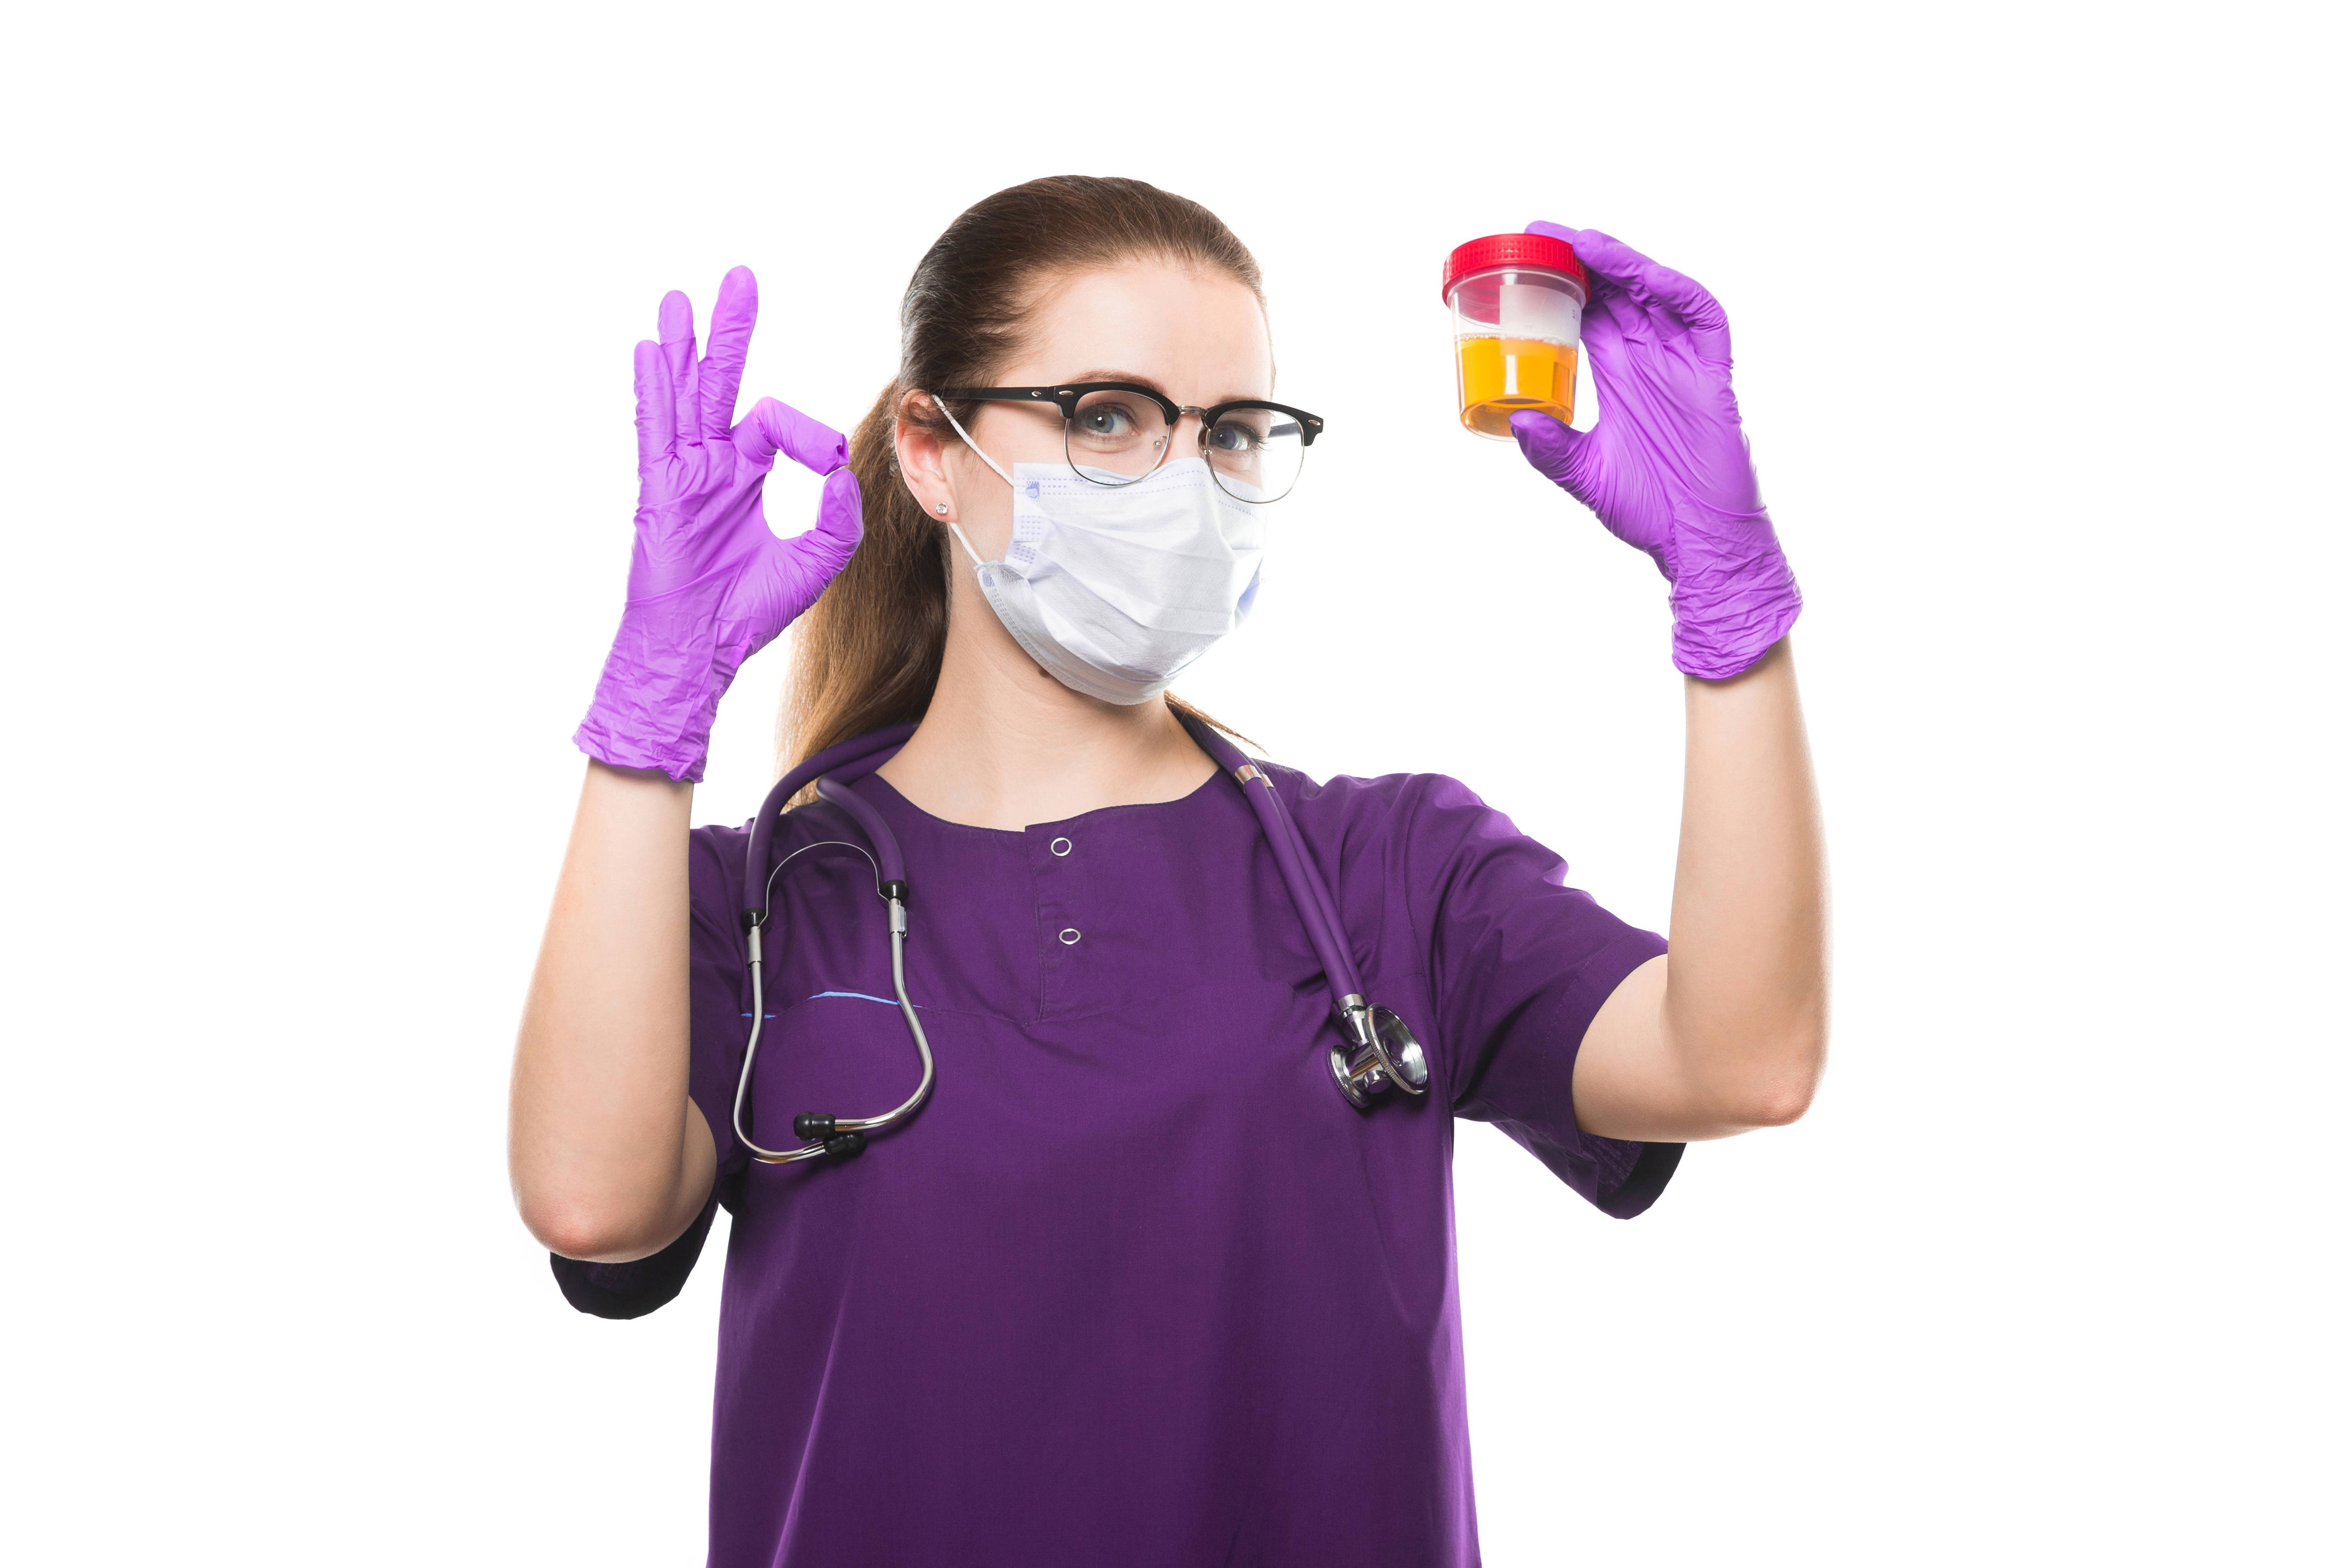 women in scrubs signing okay and hold urine sample in opposite hand